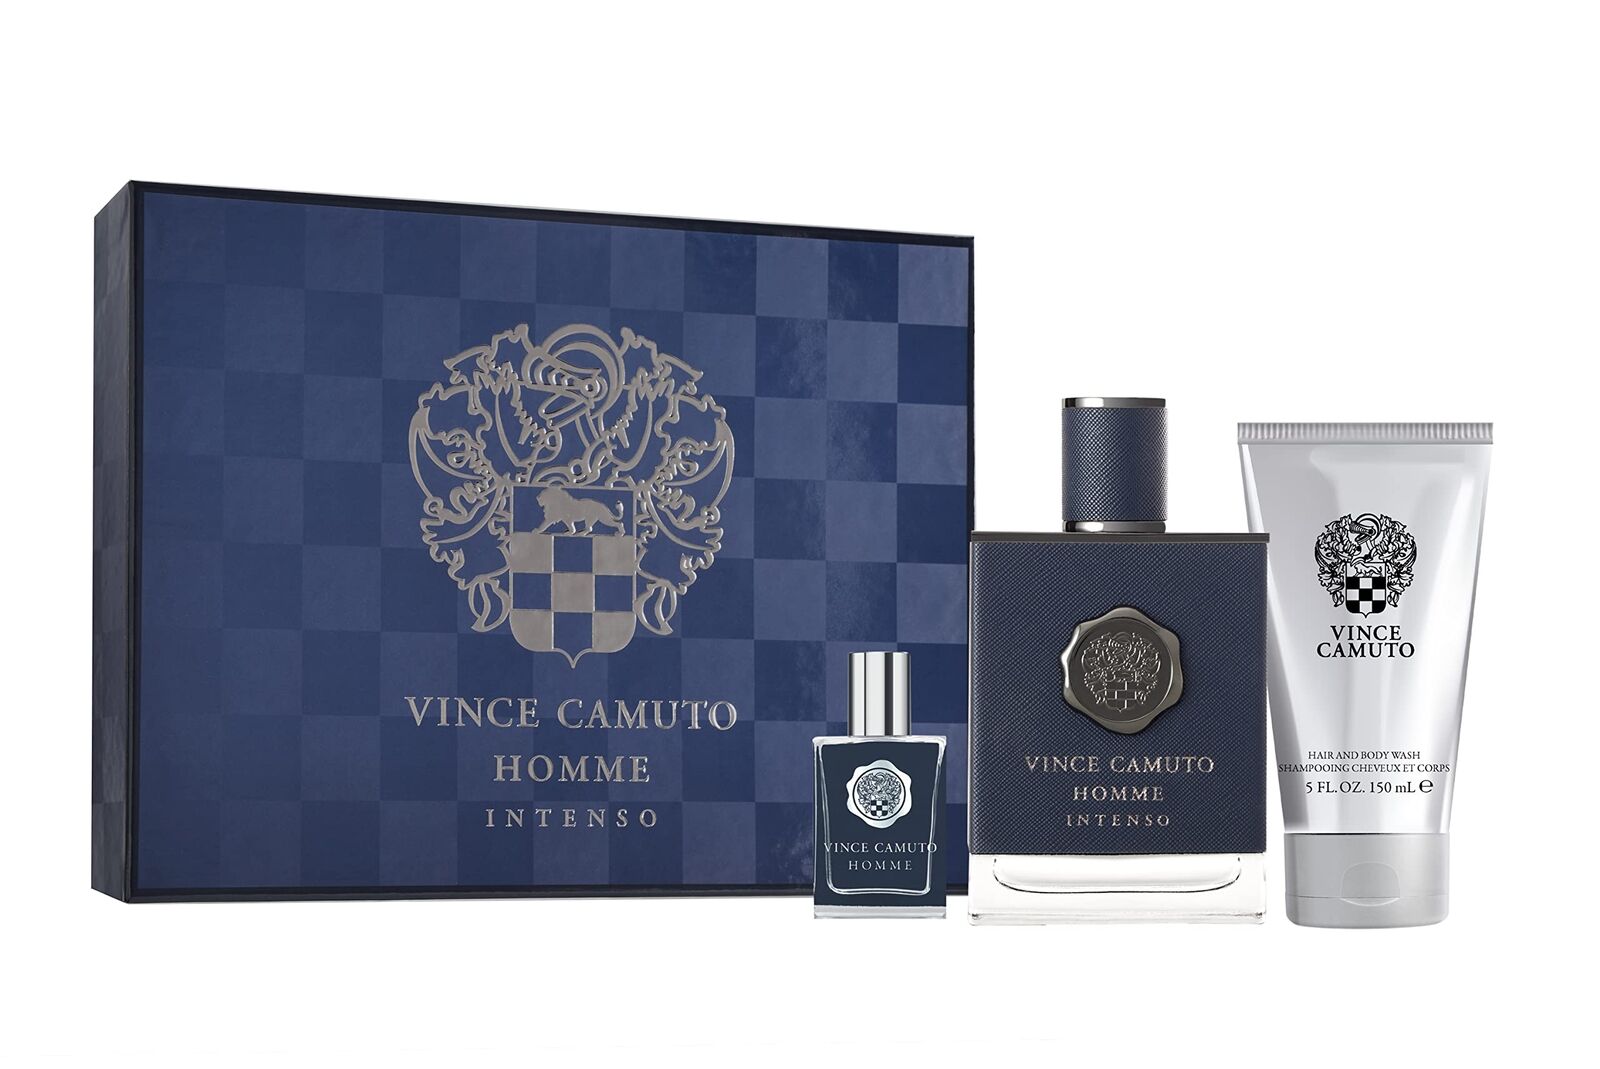 Vince Camuto Vince Camuto Homme Intenso Gift Set